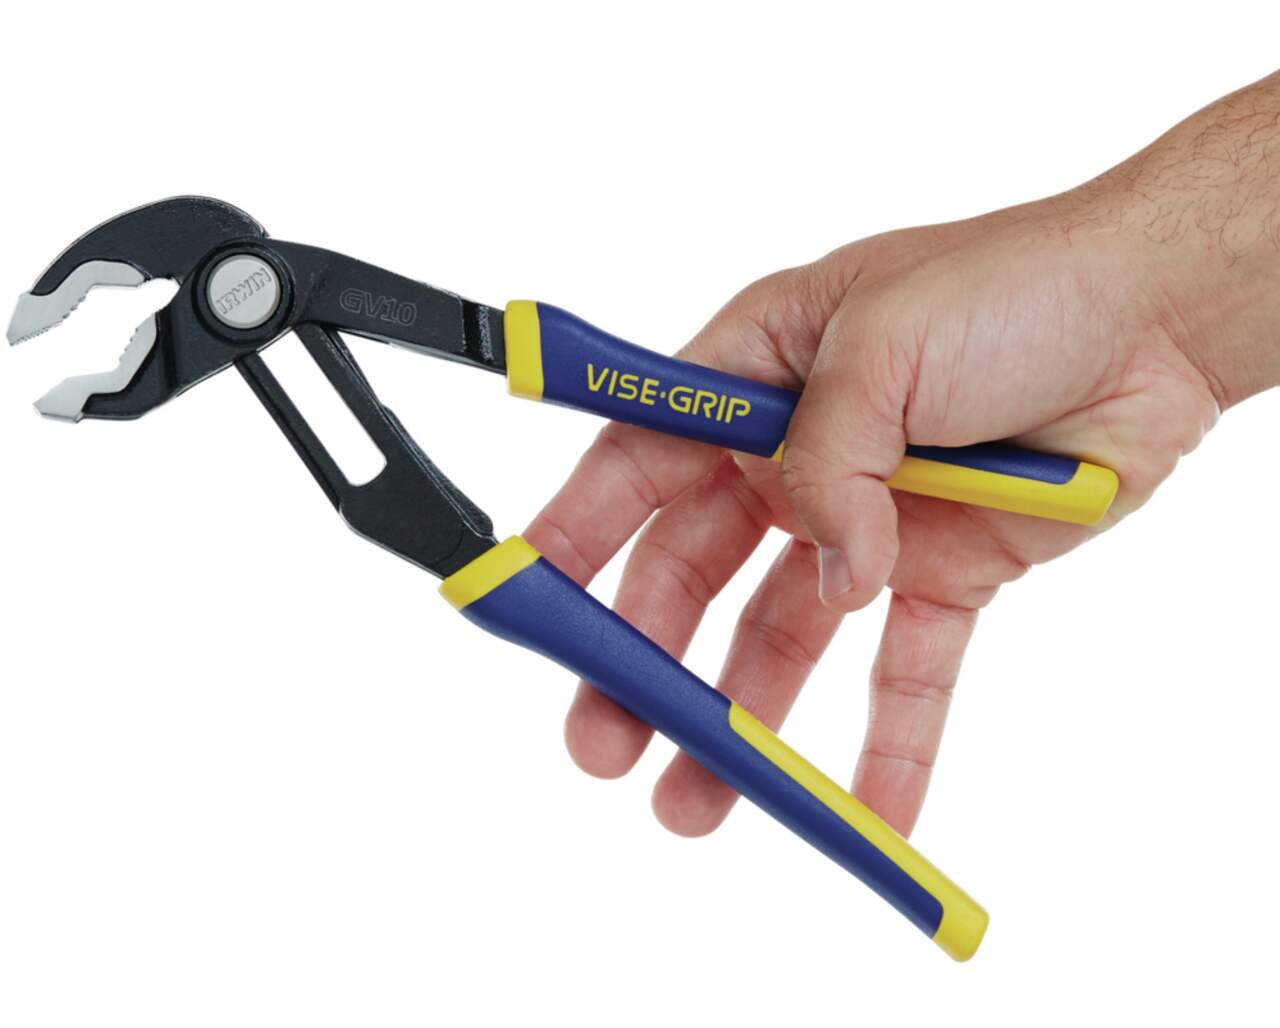 IRWIN 2078709 Vise-Grip V Jaw GrooveLock Pliers Set, ProTouch